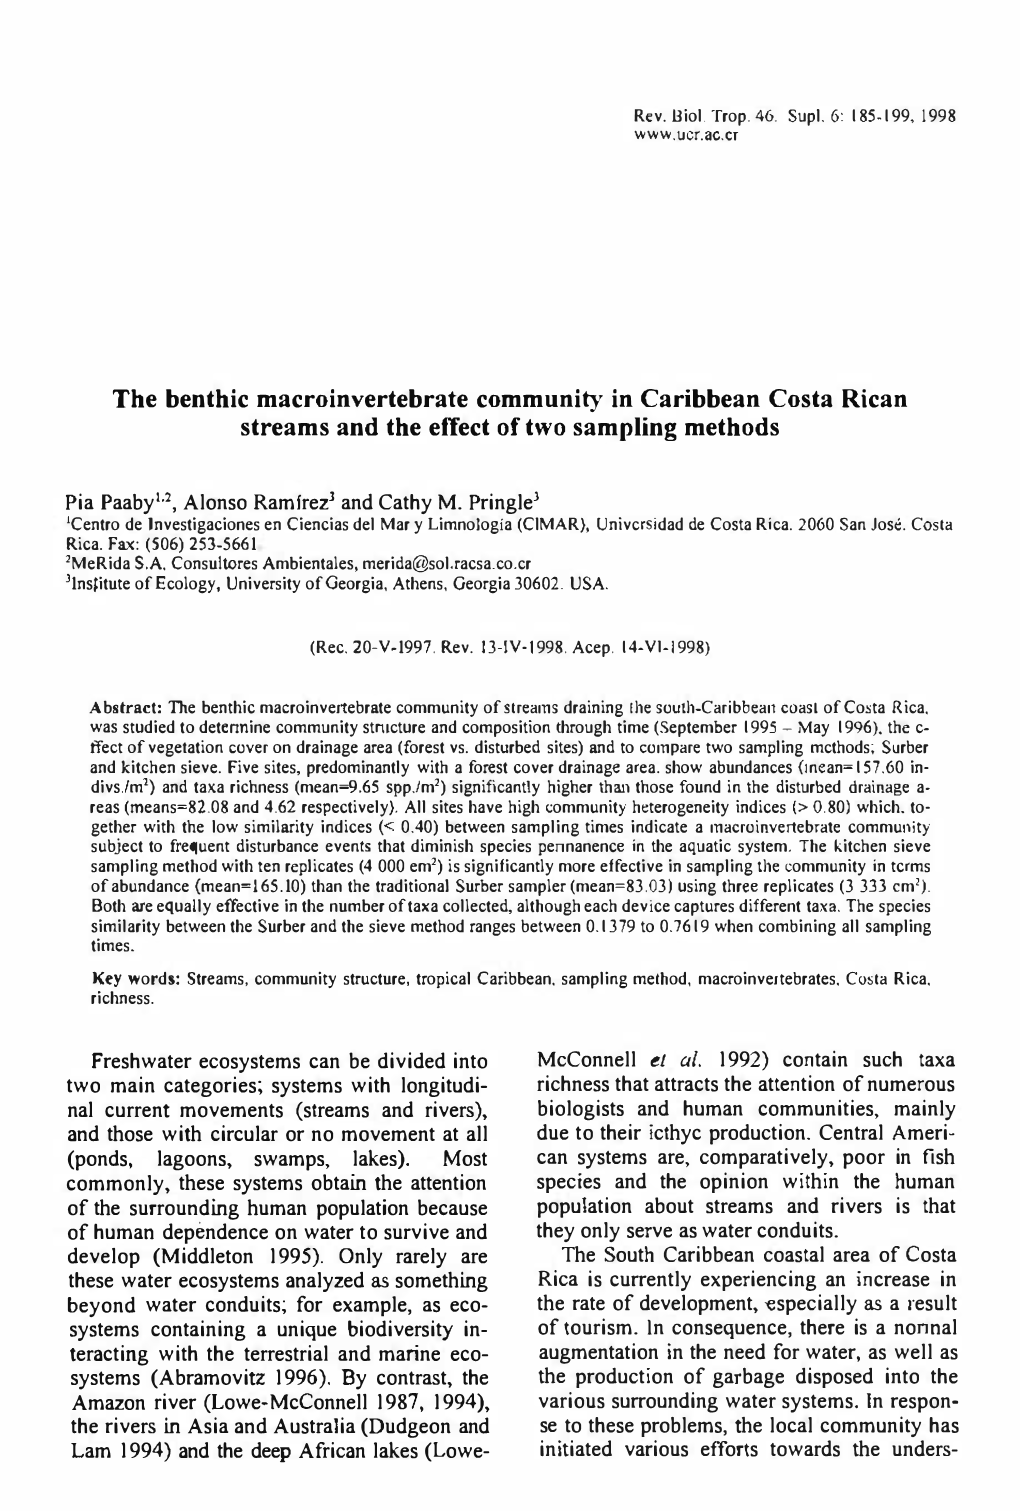 The Benthic Macro Invertebrate Community in Caribbean Costa Rican Streams and the Effect of Two Sampling Methods